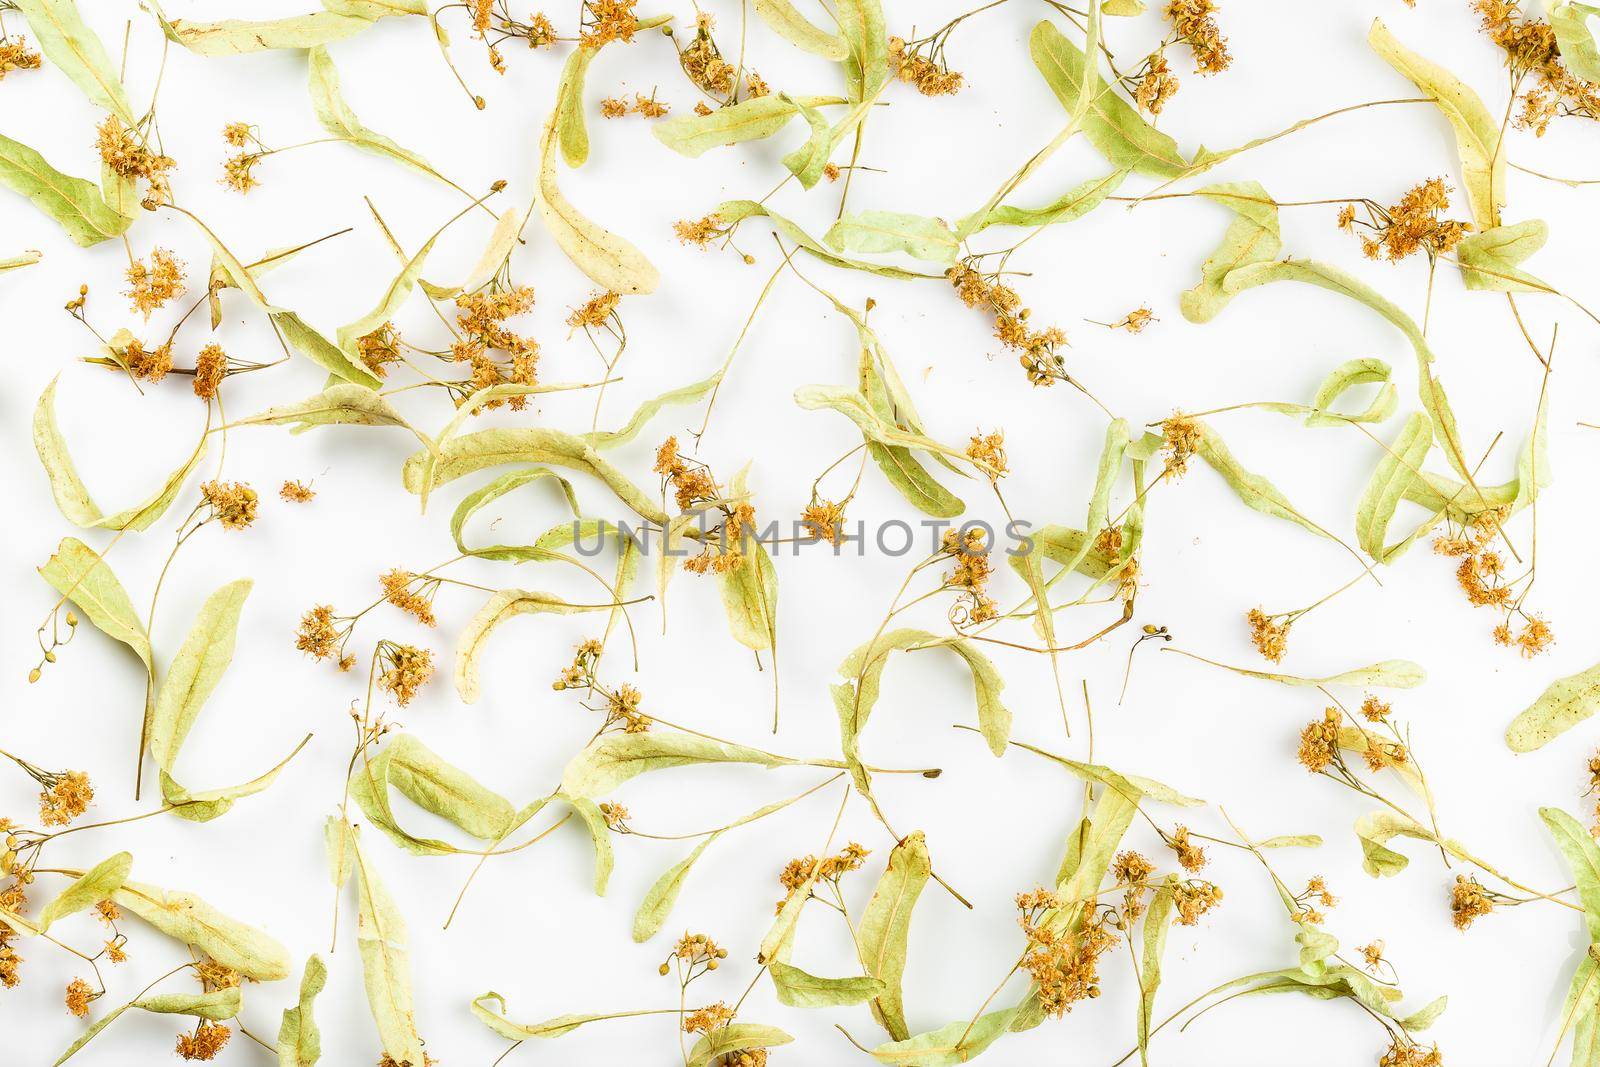 Dried linden tea flowers scattered on the white background. Alternative herbal medicine 